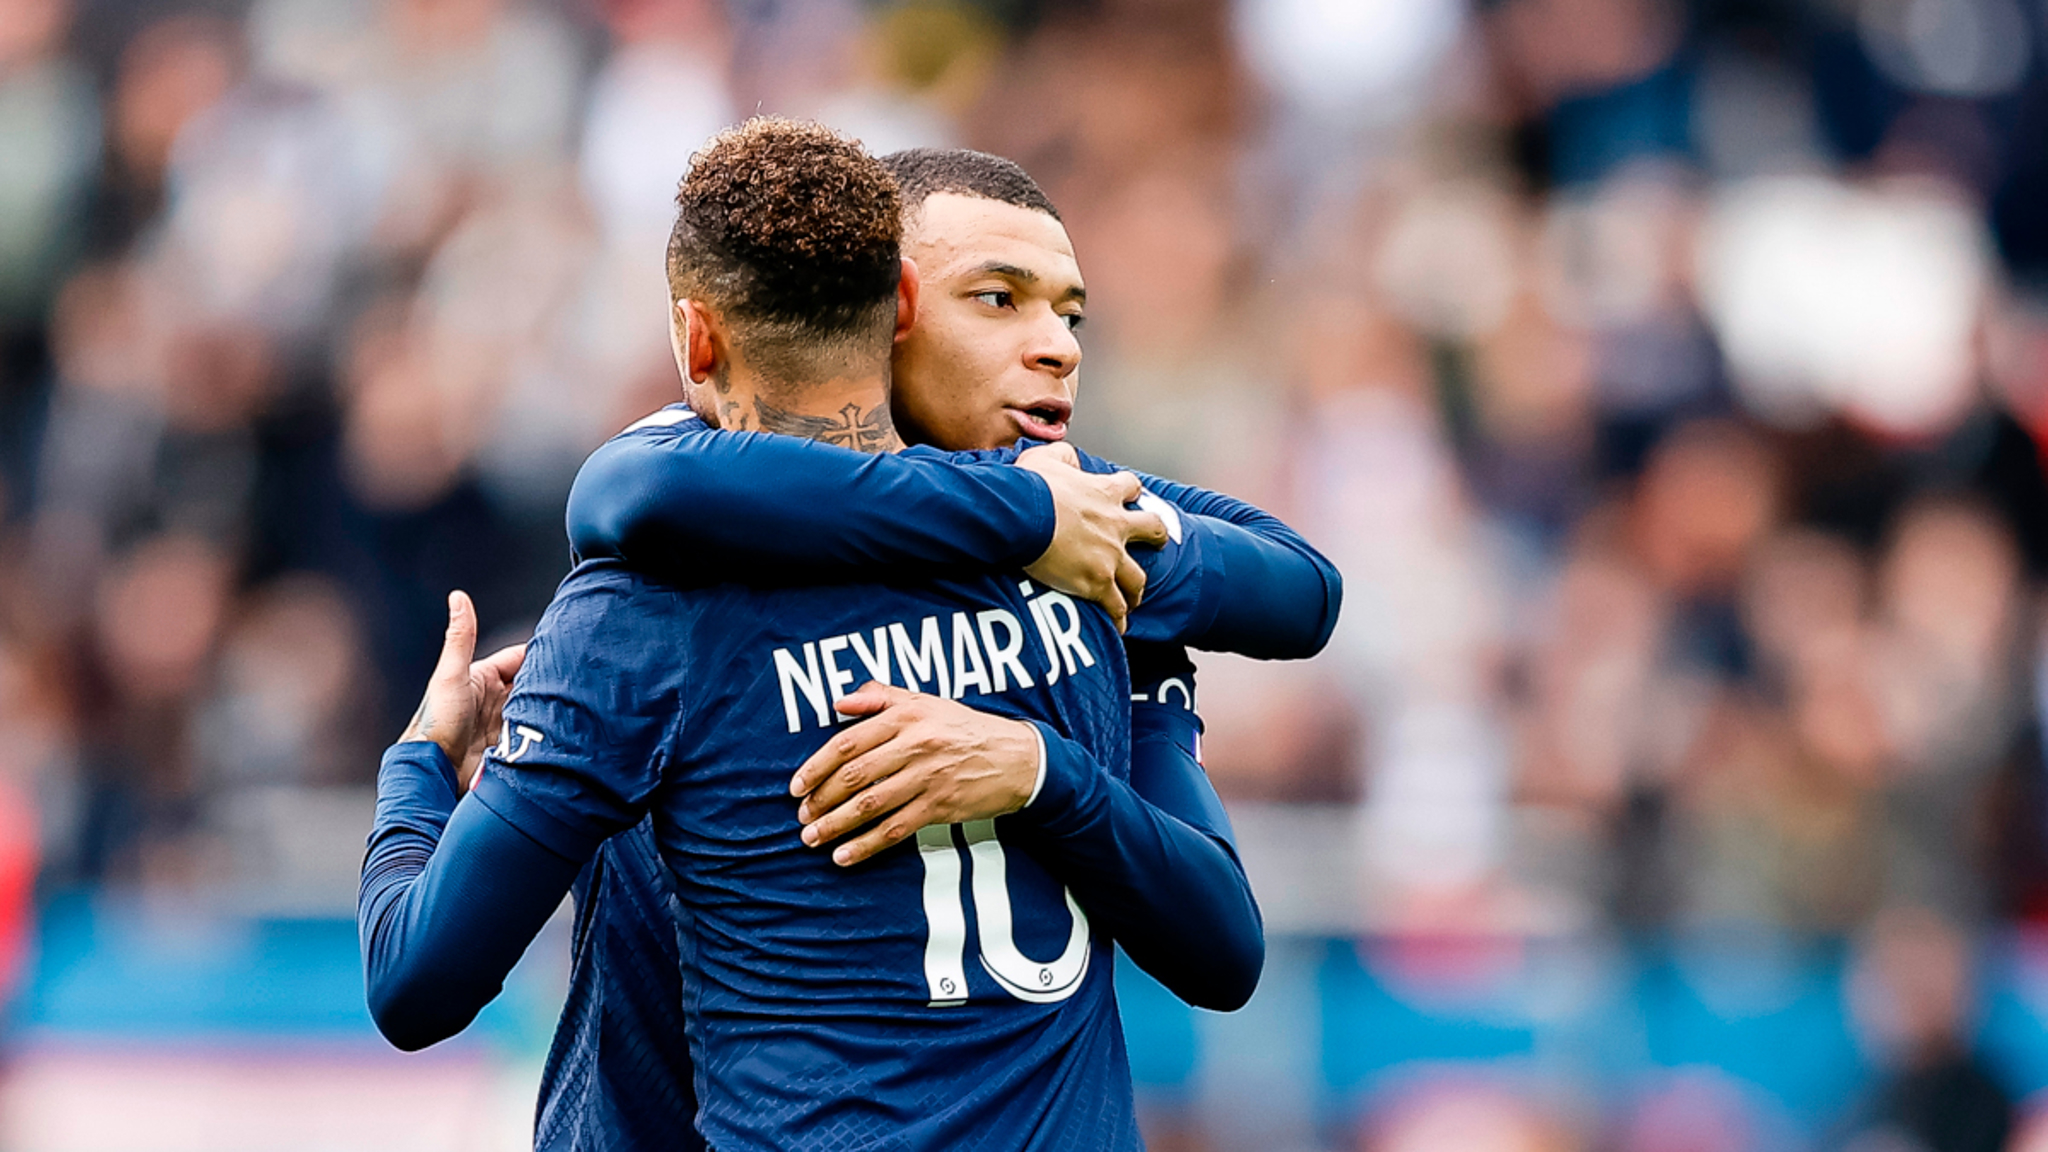 Neymar 'in negotiations' for Saudi move as Mbappe returns to PSG good books | SuperSport